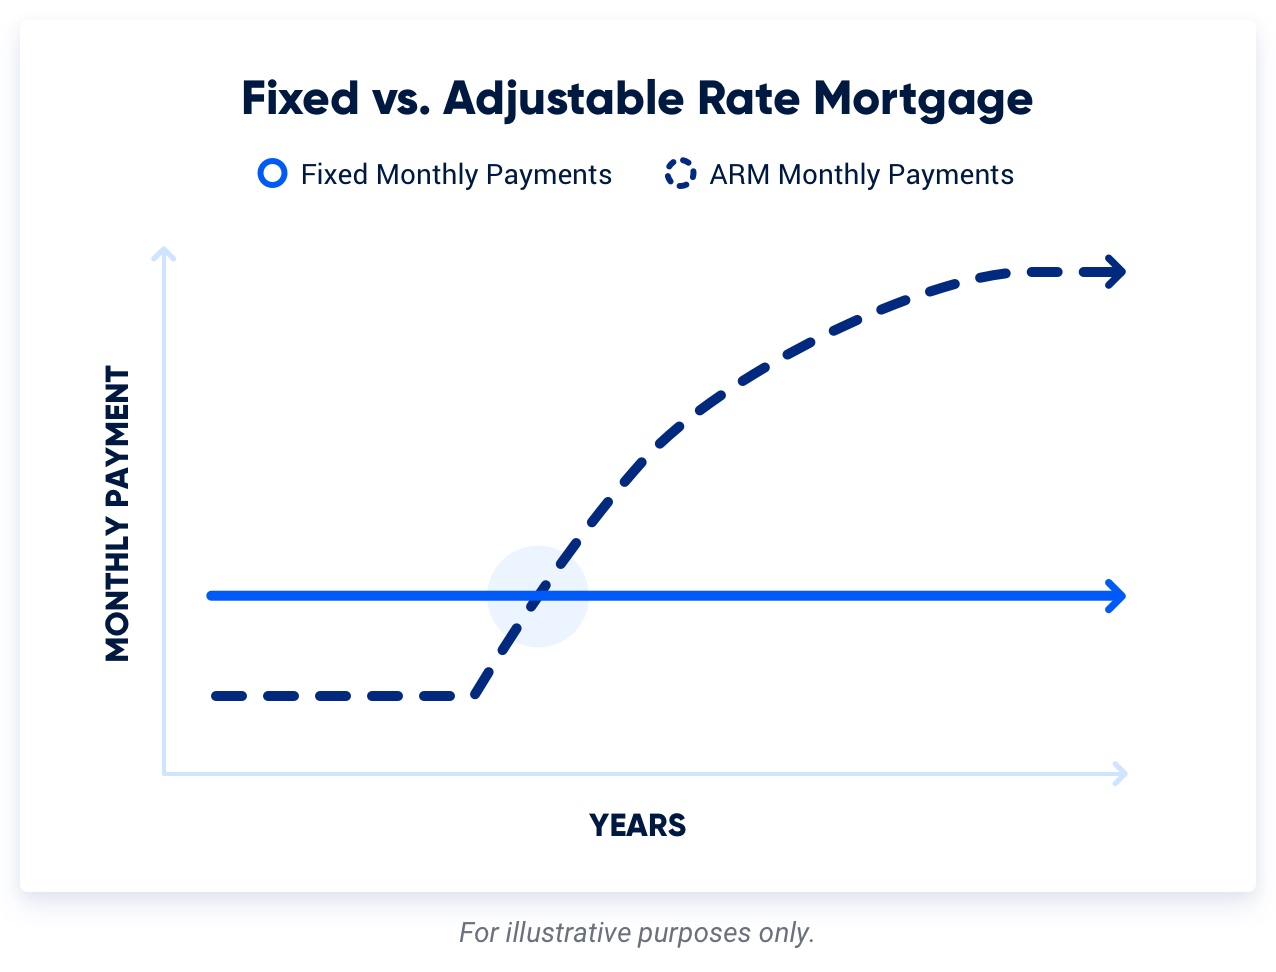 A line graph highlighting the difference between fixed-rate and adjustable-rate monthly payments. Fixed-rate payments stay the same while adjustable-rate monthly payments increase over time.